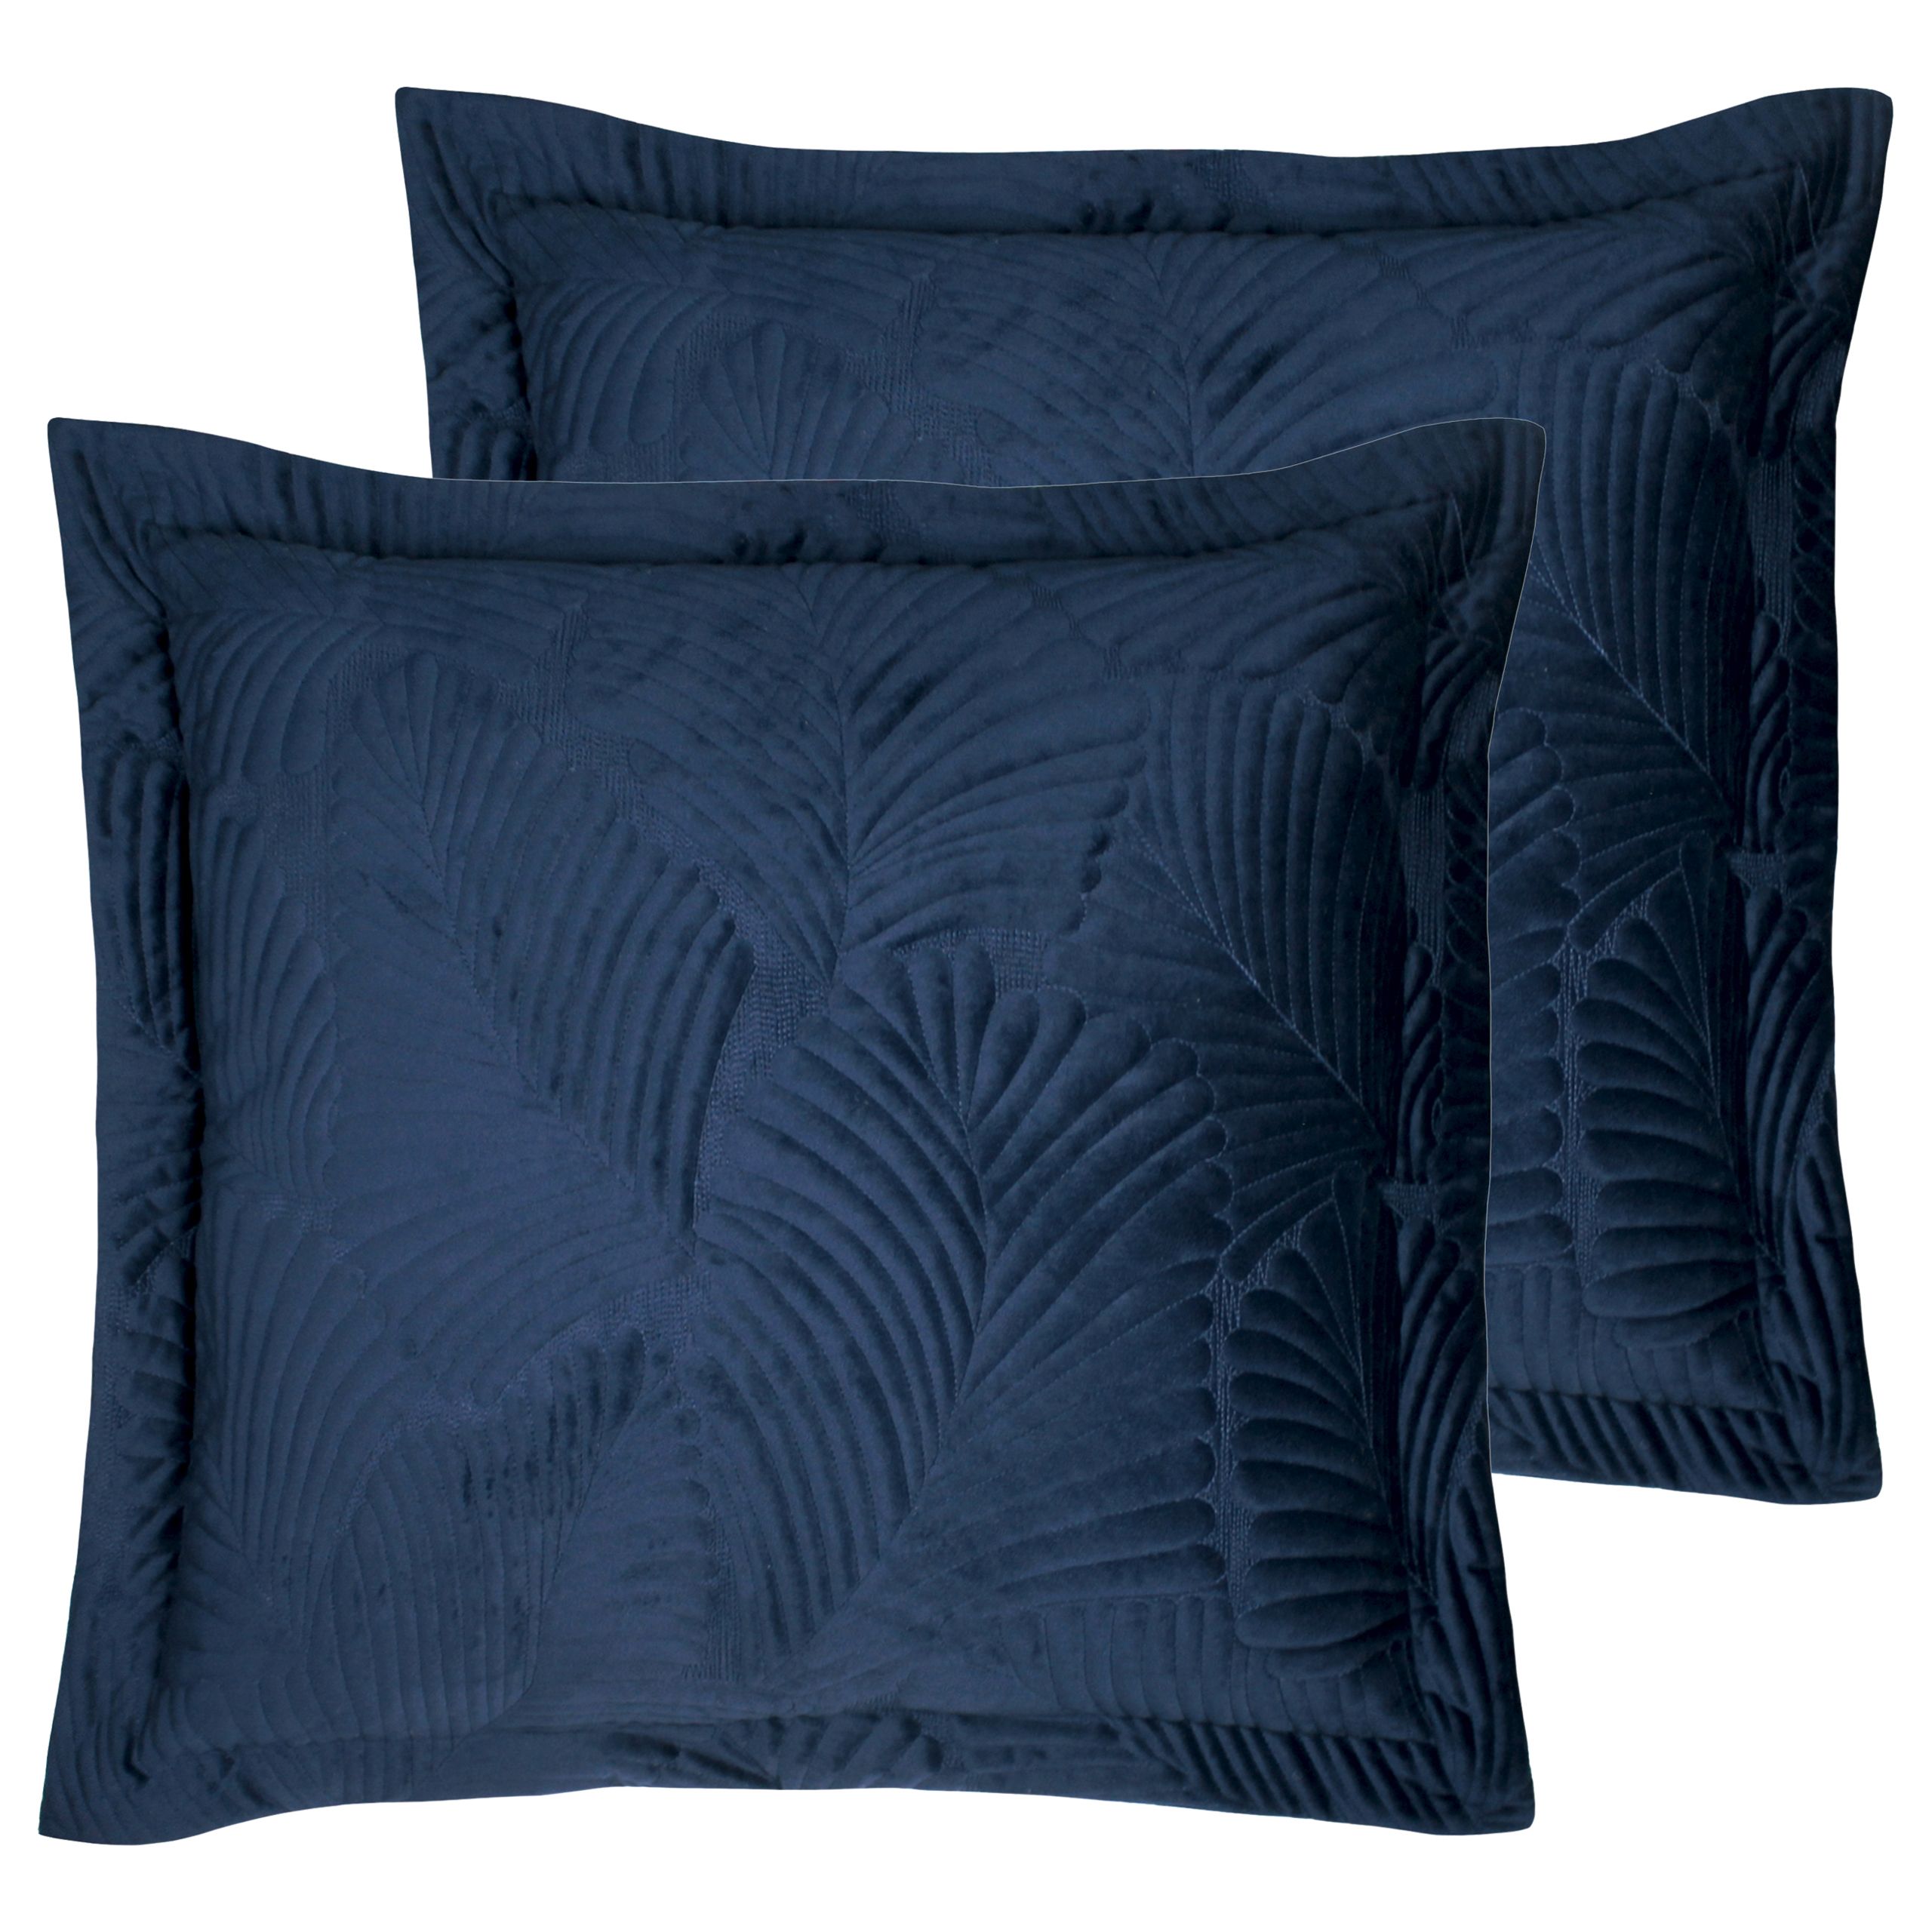 Add showstopping style and opulence to your bedroom with our quilted Palmeria Cushion, featuring luxe embroidery on a soft, sumptuous velvet. With a delicate cotton reverse and oxford edge for the perfect finishing touch, this design will compliment perfectly with its coordinating Duvet Cover Set and additional Pillowcase Set.